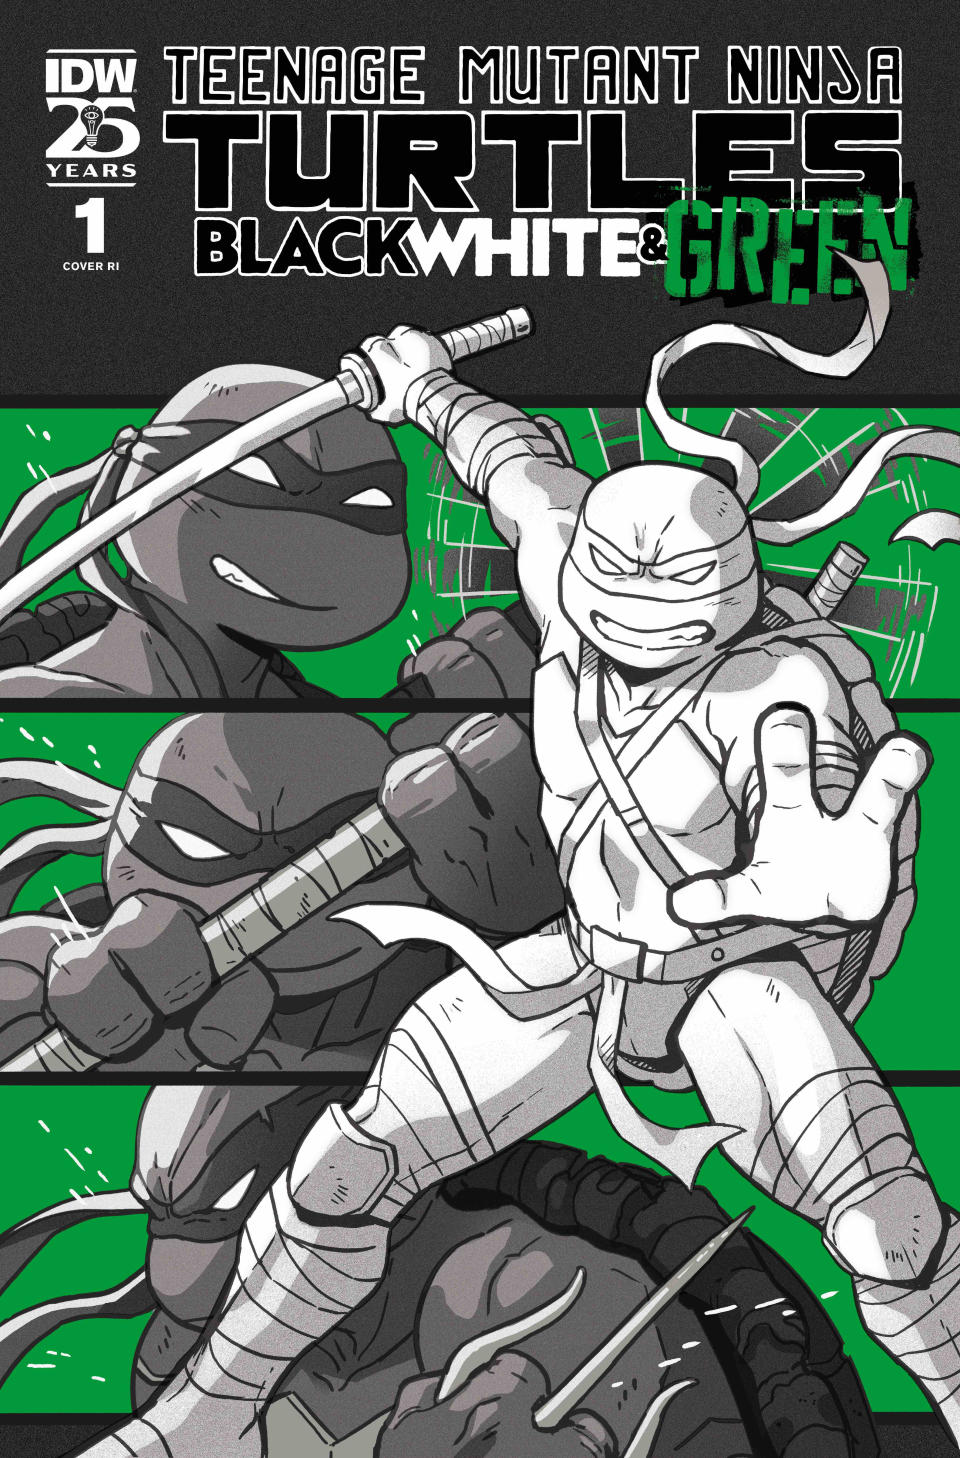 Covers for TMNT: Black, White, and Green